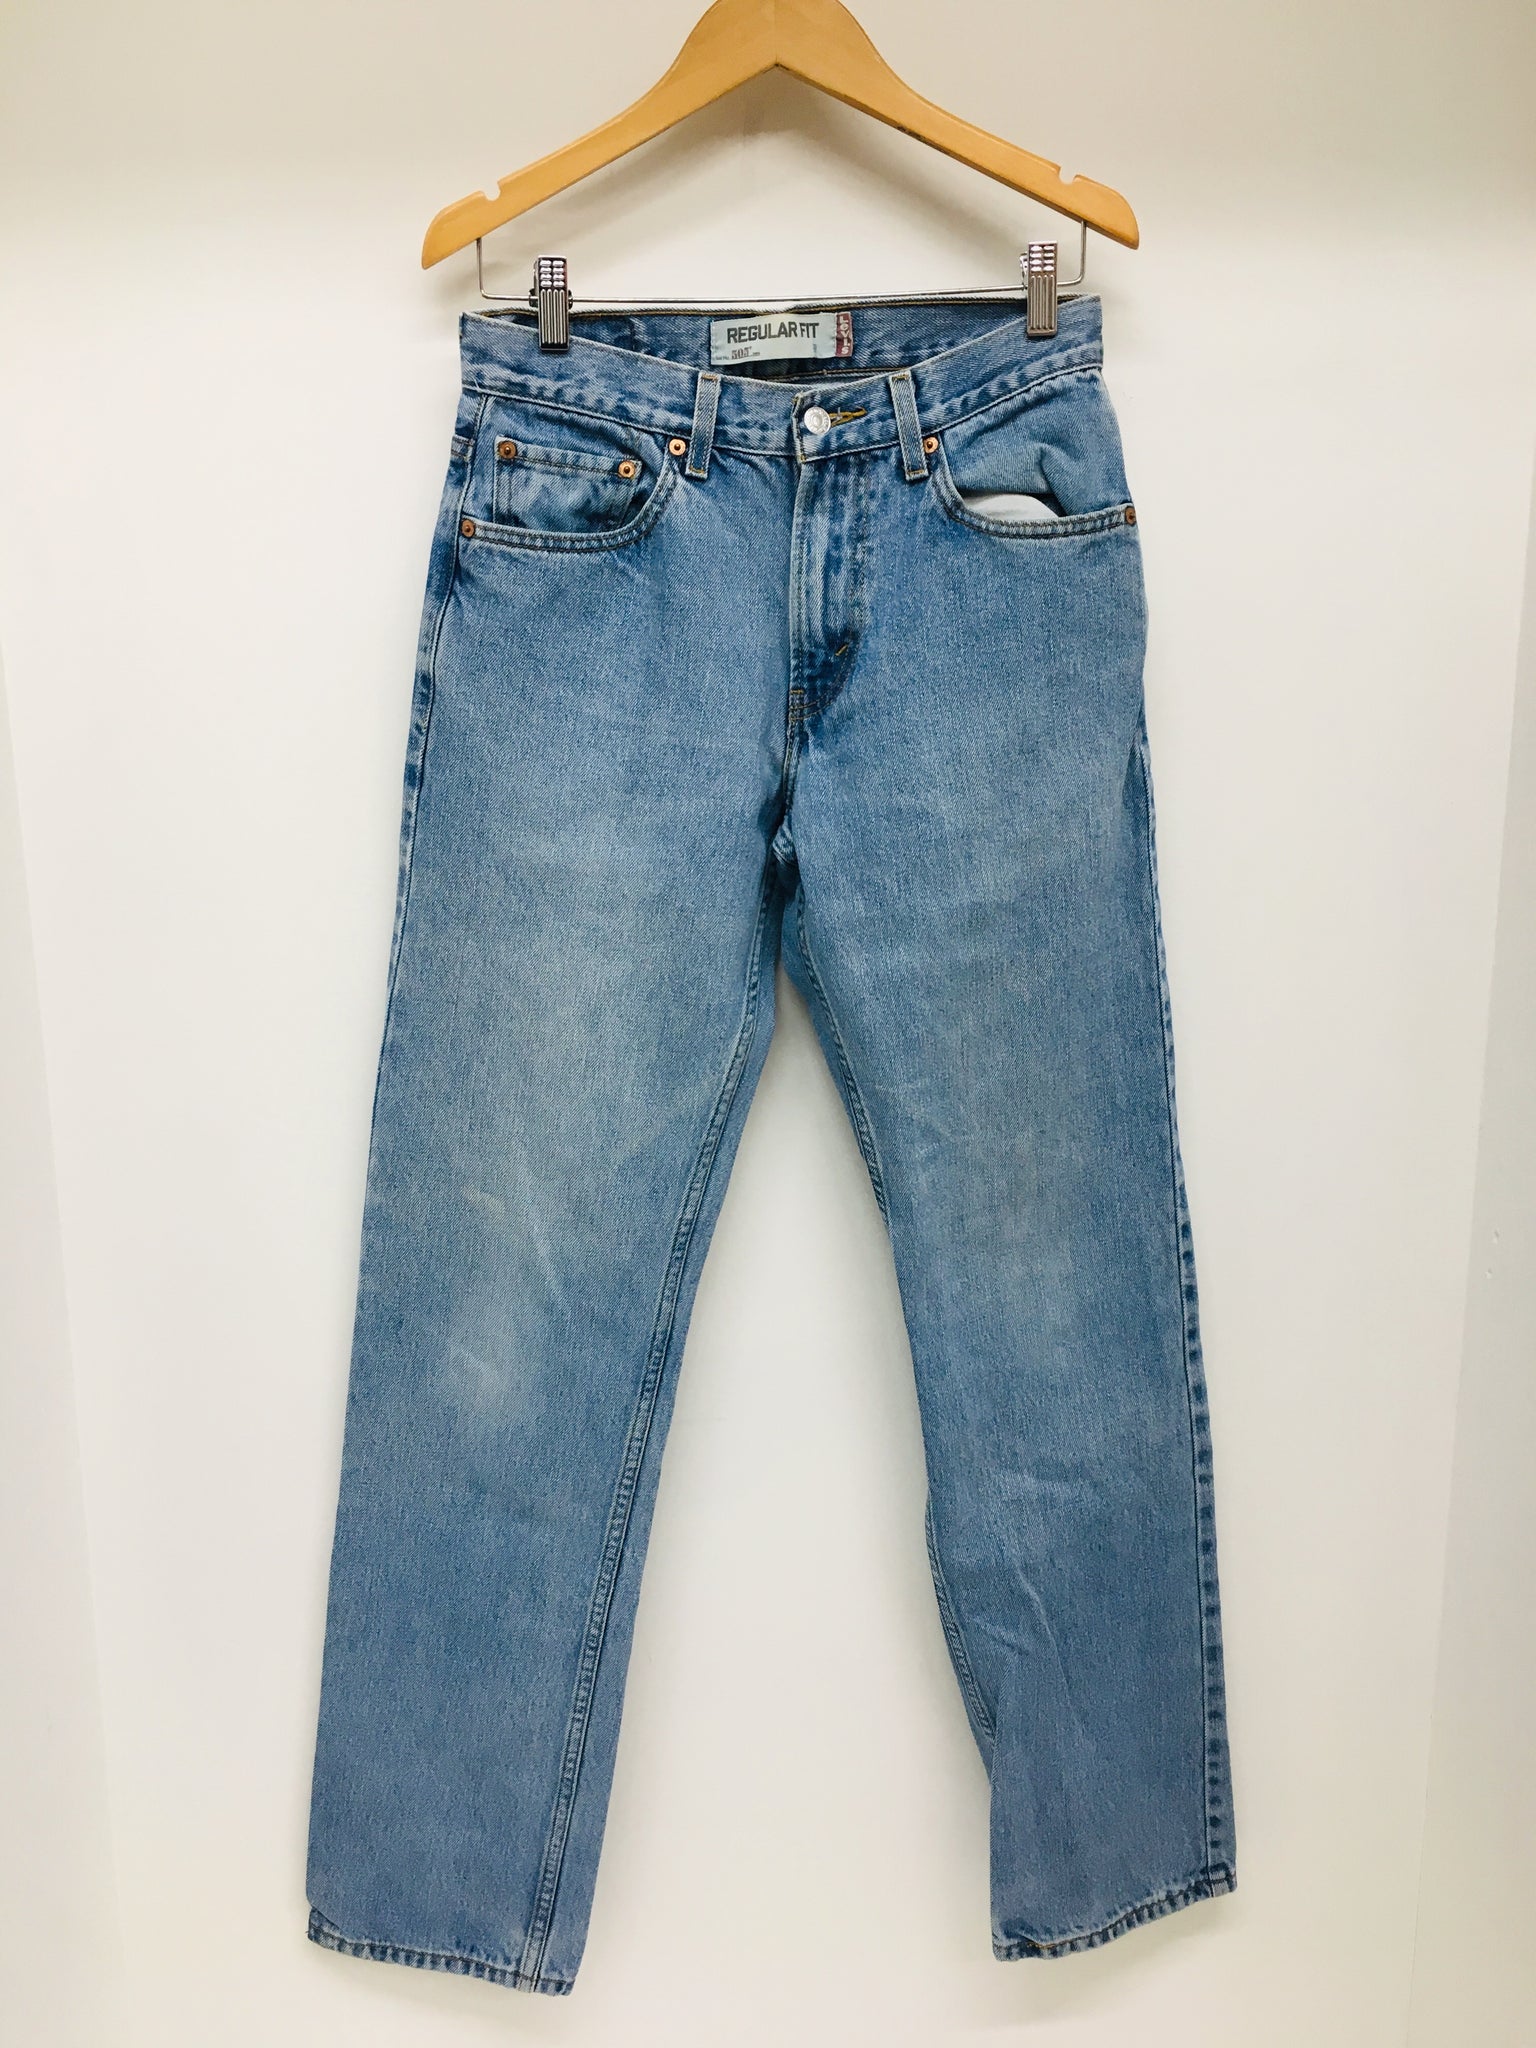 29x34 jeans